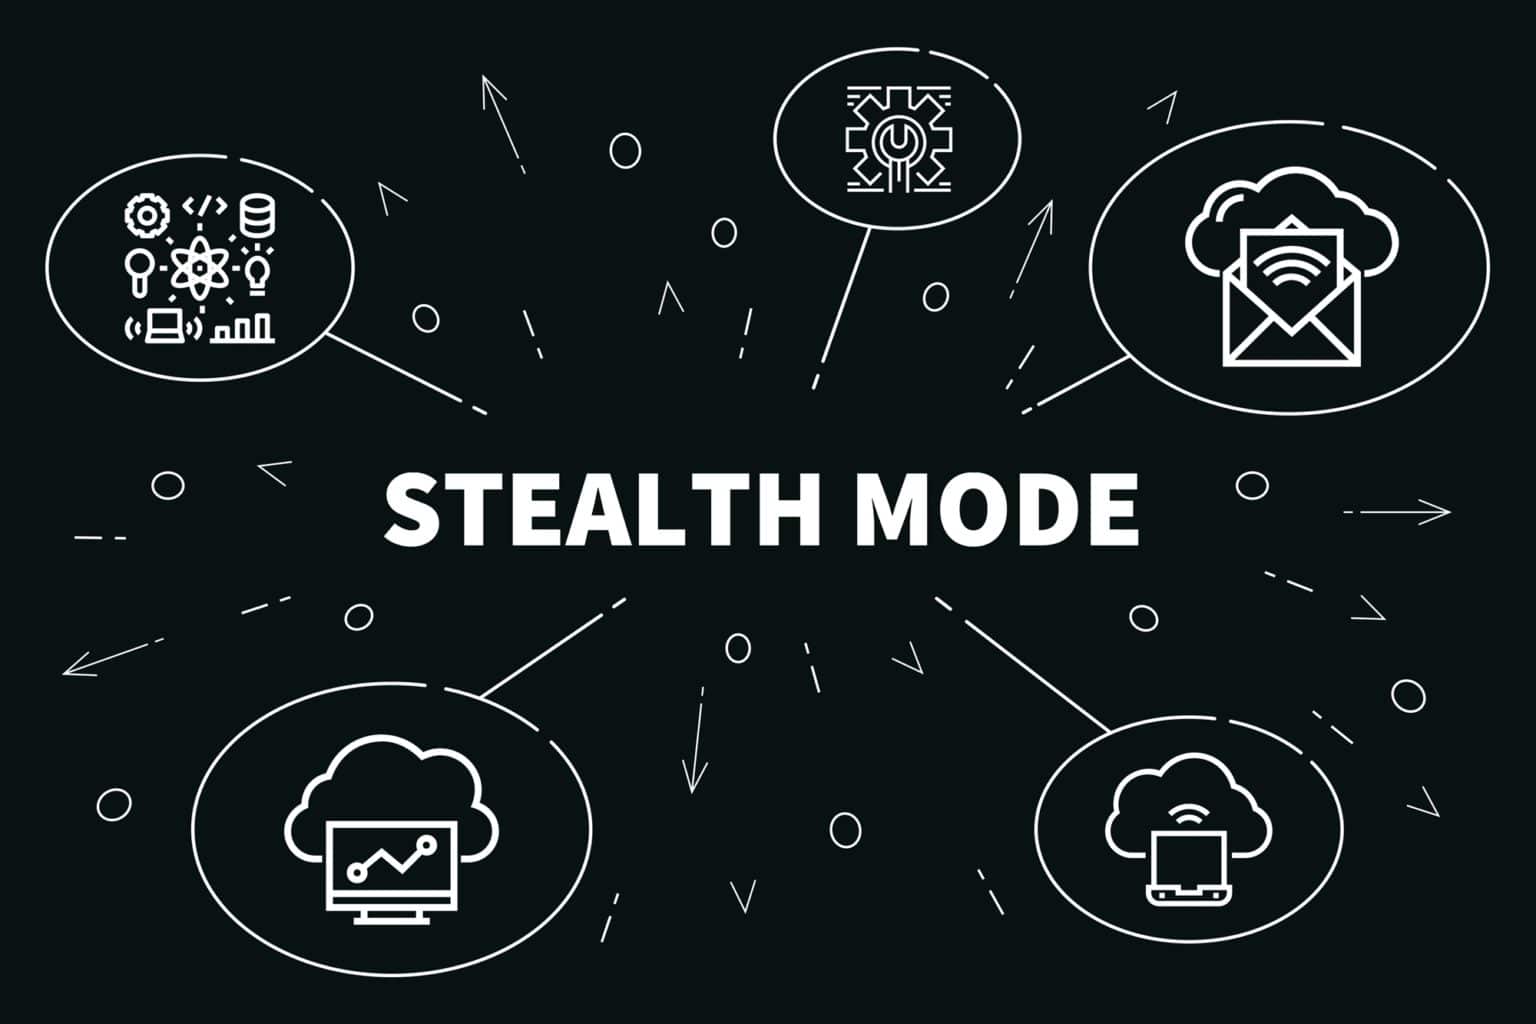 Stealth Startup: Pros & Cons of Stealth Mode